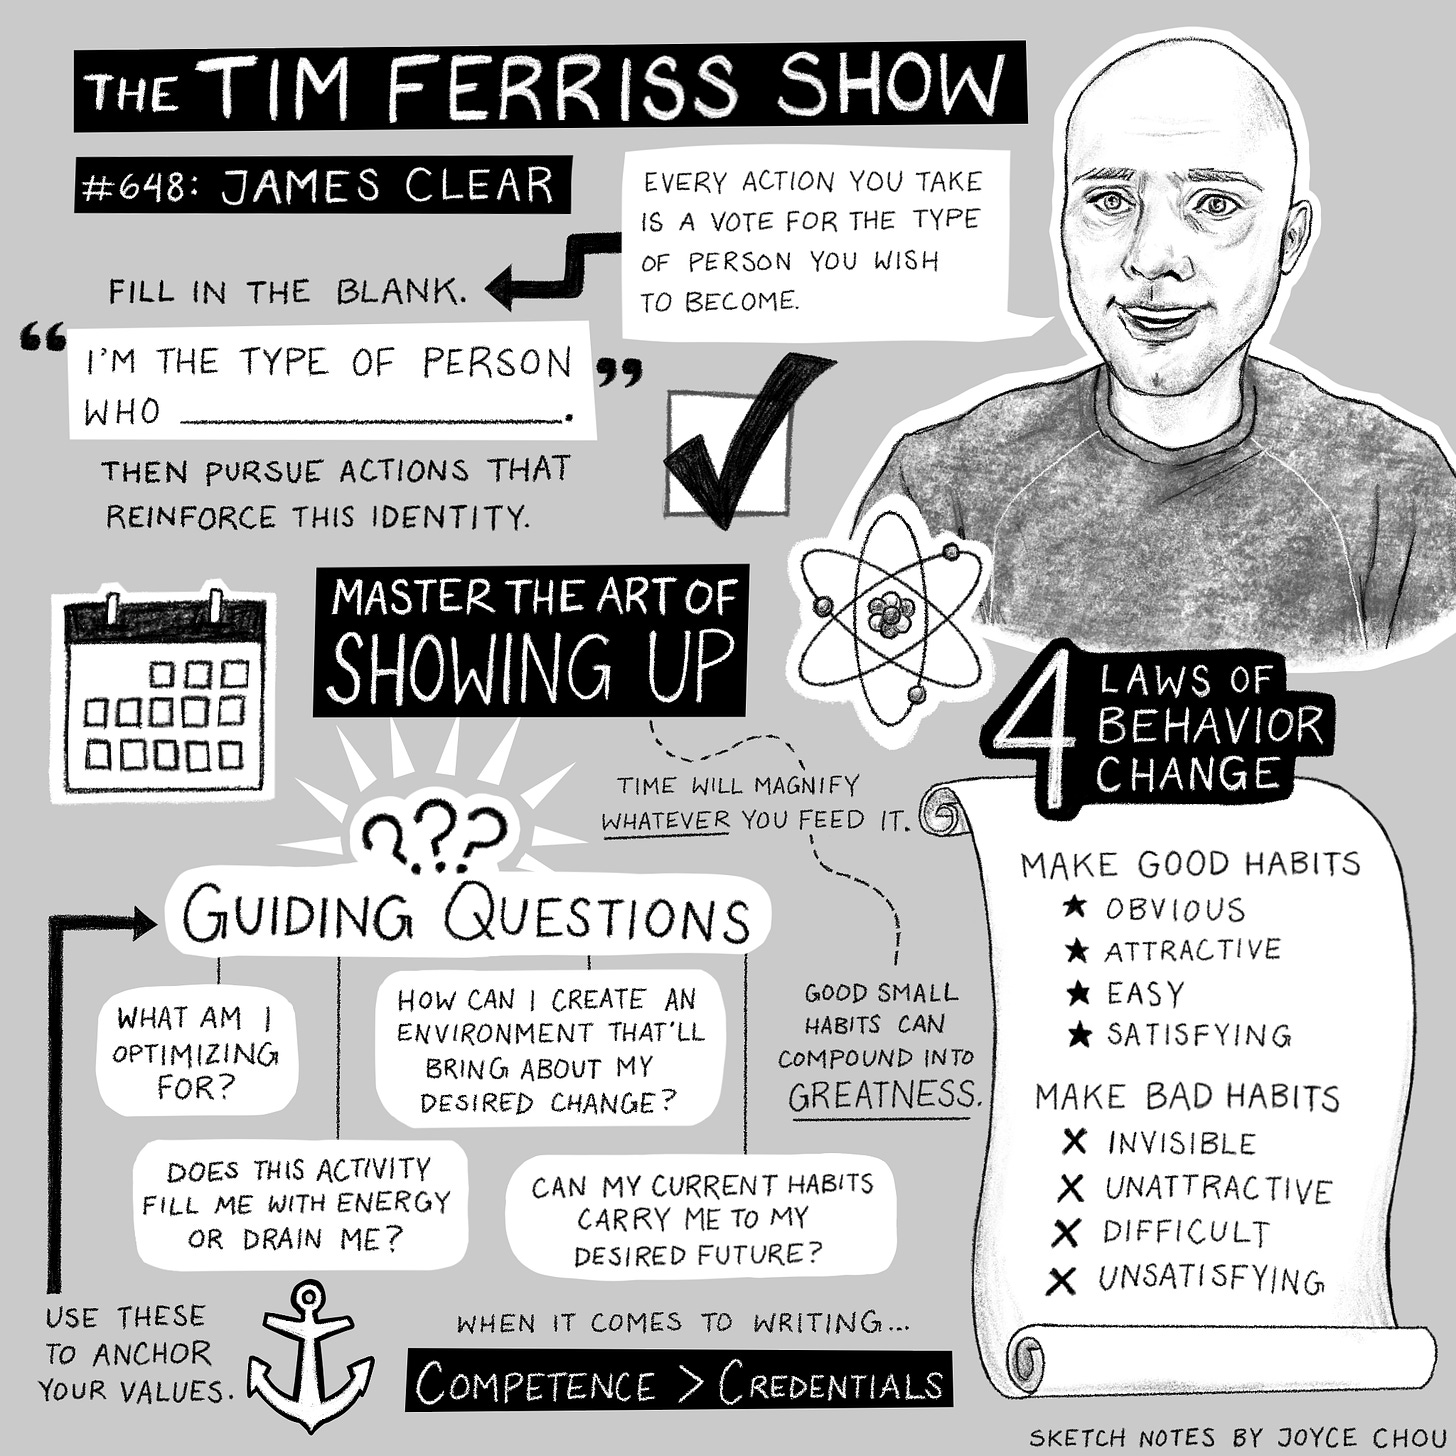 Sketch notes about The Tim Ferriss Show Episode #648 with James Clear